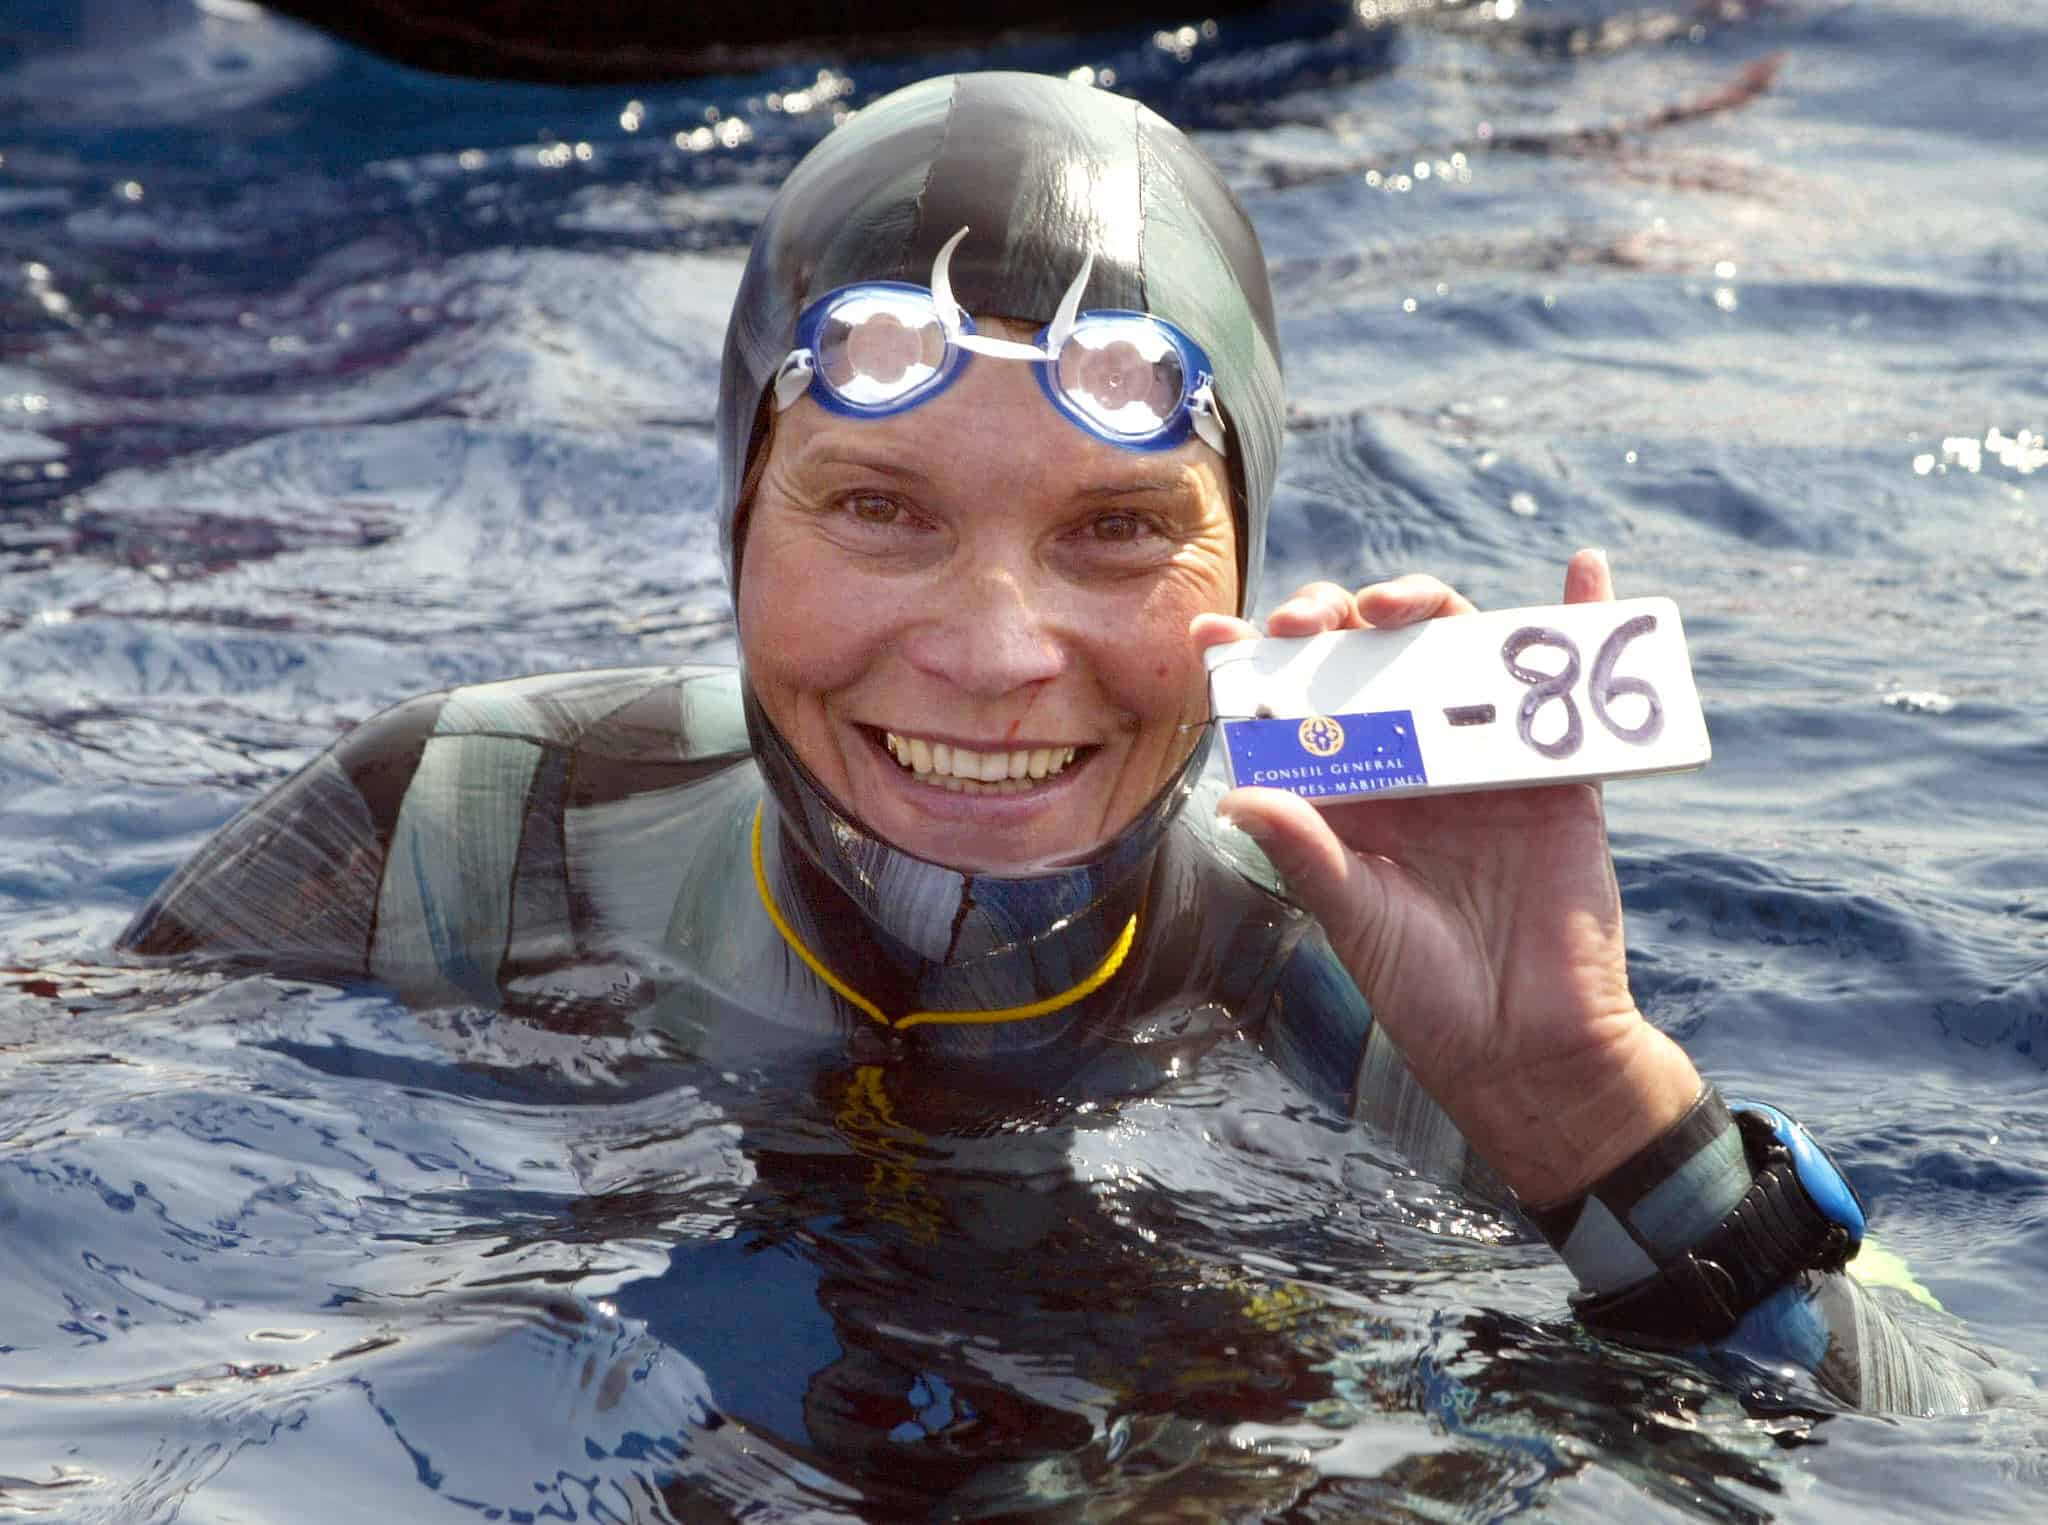 A file photo taken on Sept. 3, 2005 shows Russian Natalia Molchanova holding the minus 86 meters tag.